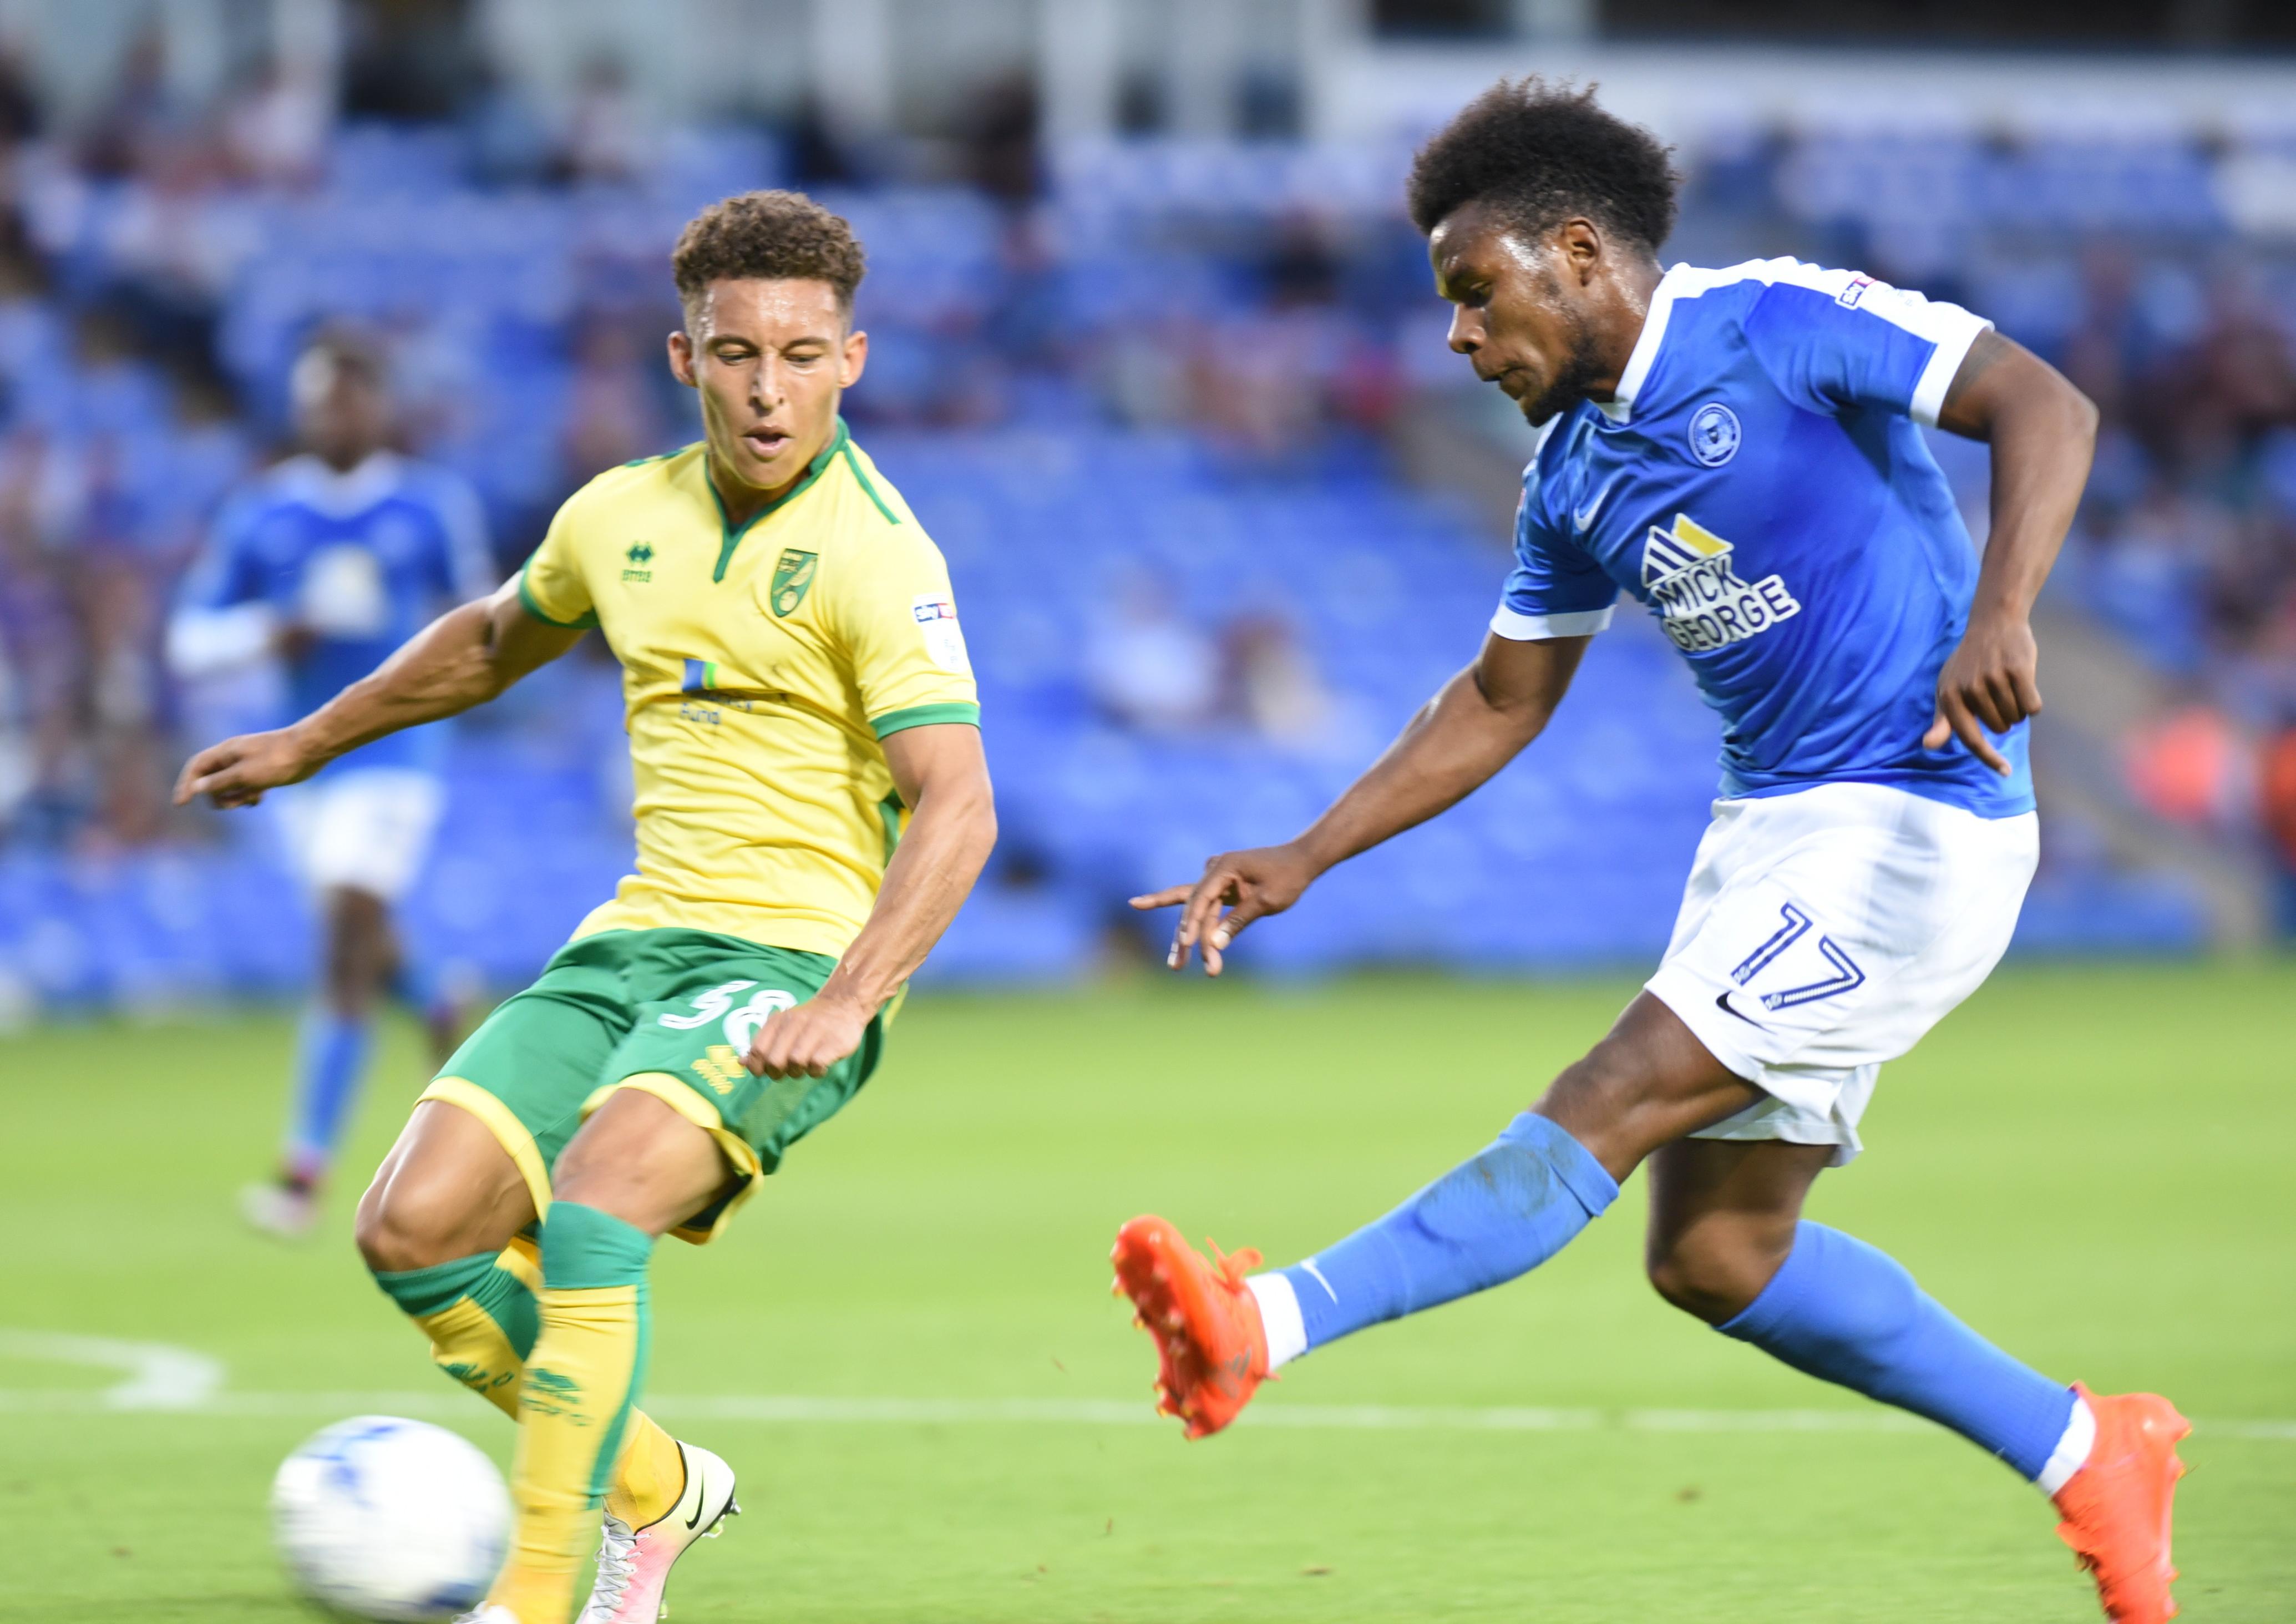 The heaviest defeat of the decade was 6-0 at Reading in a 2010 Championship fixture. The biggest home defeat of the decade was 6-1 at the hands of Norwich City in an EFL Trophy game in 2016.